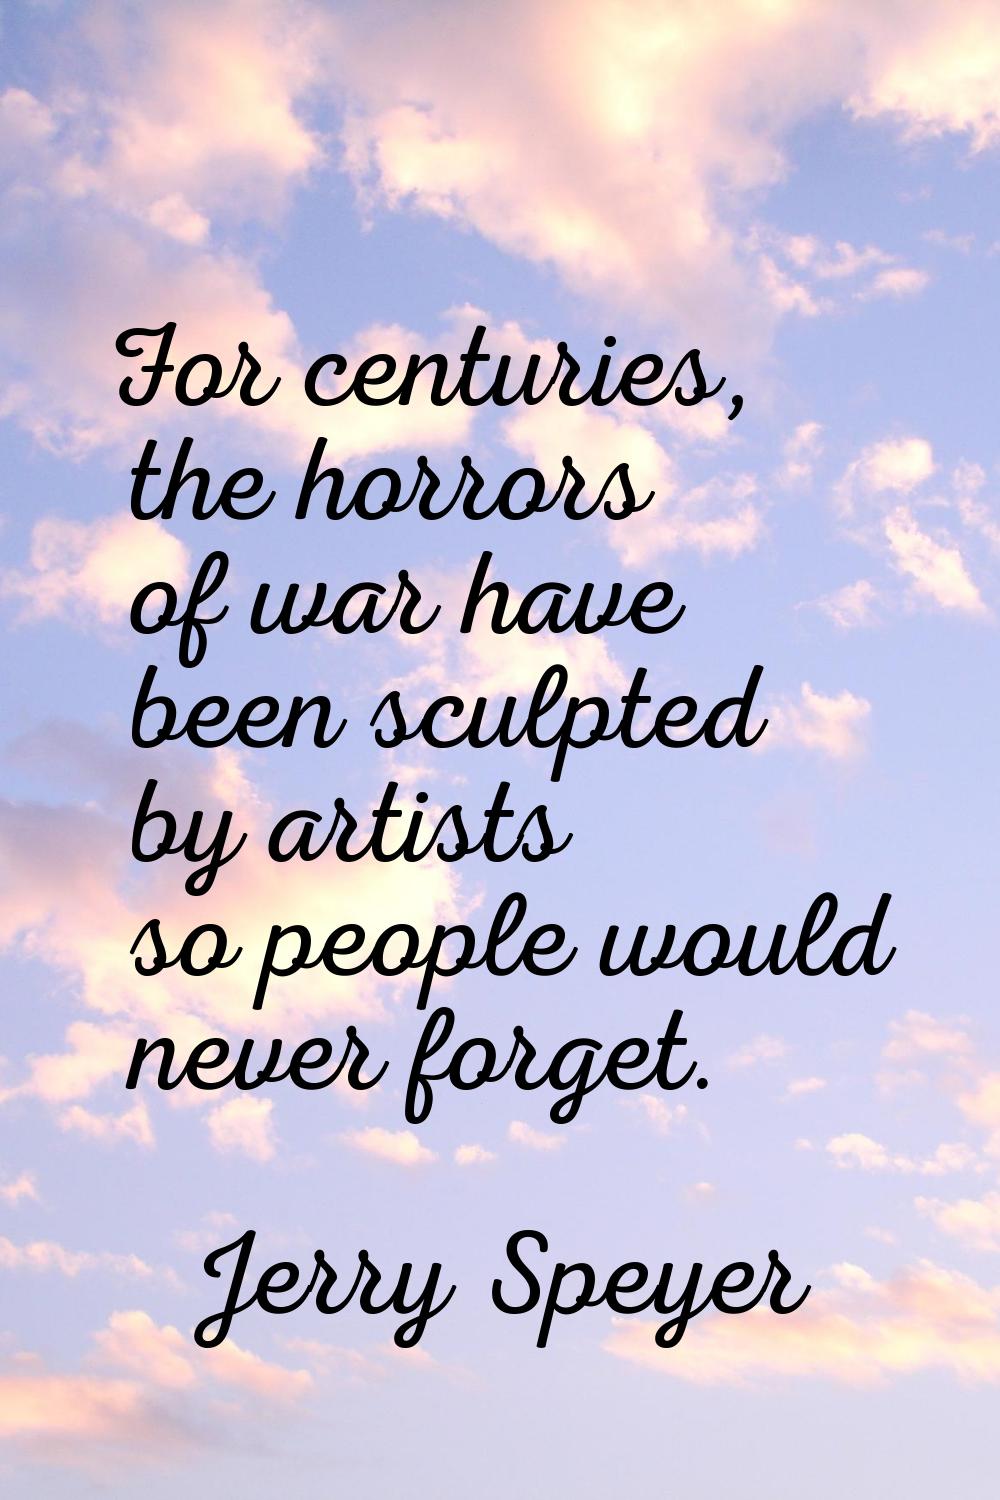 For centuries, the horrors of war have been sculpted by artists so people would never forget.